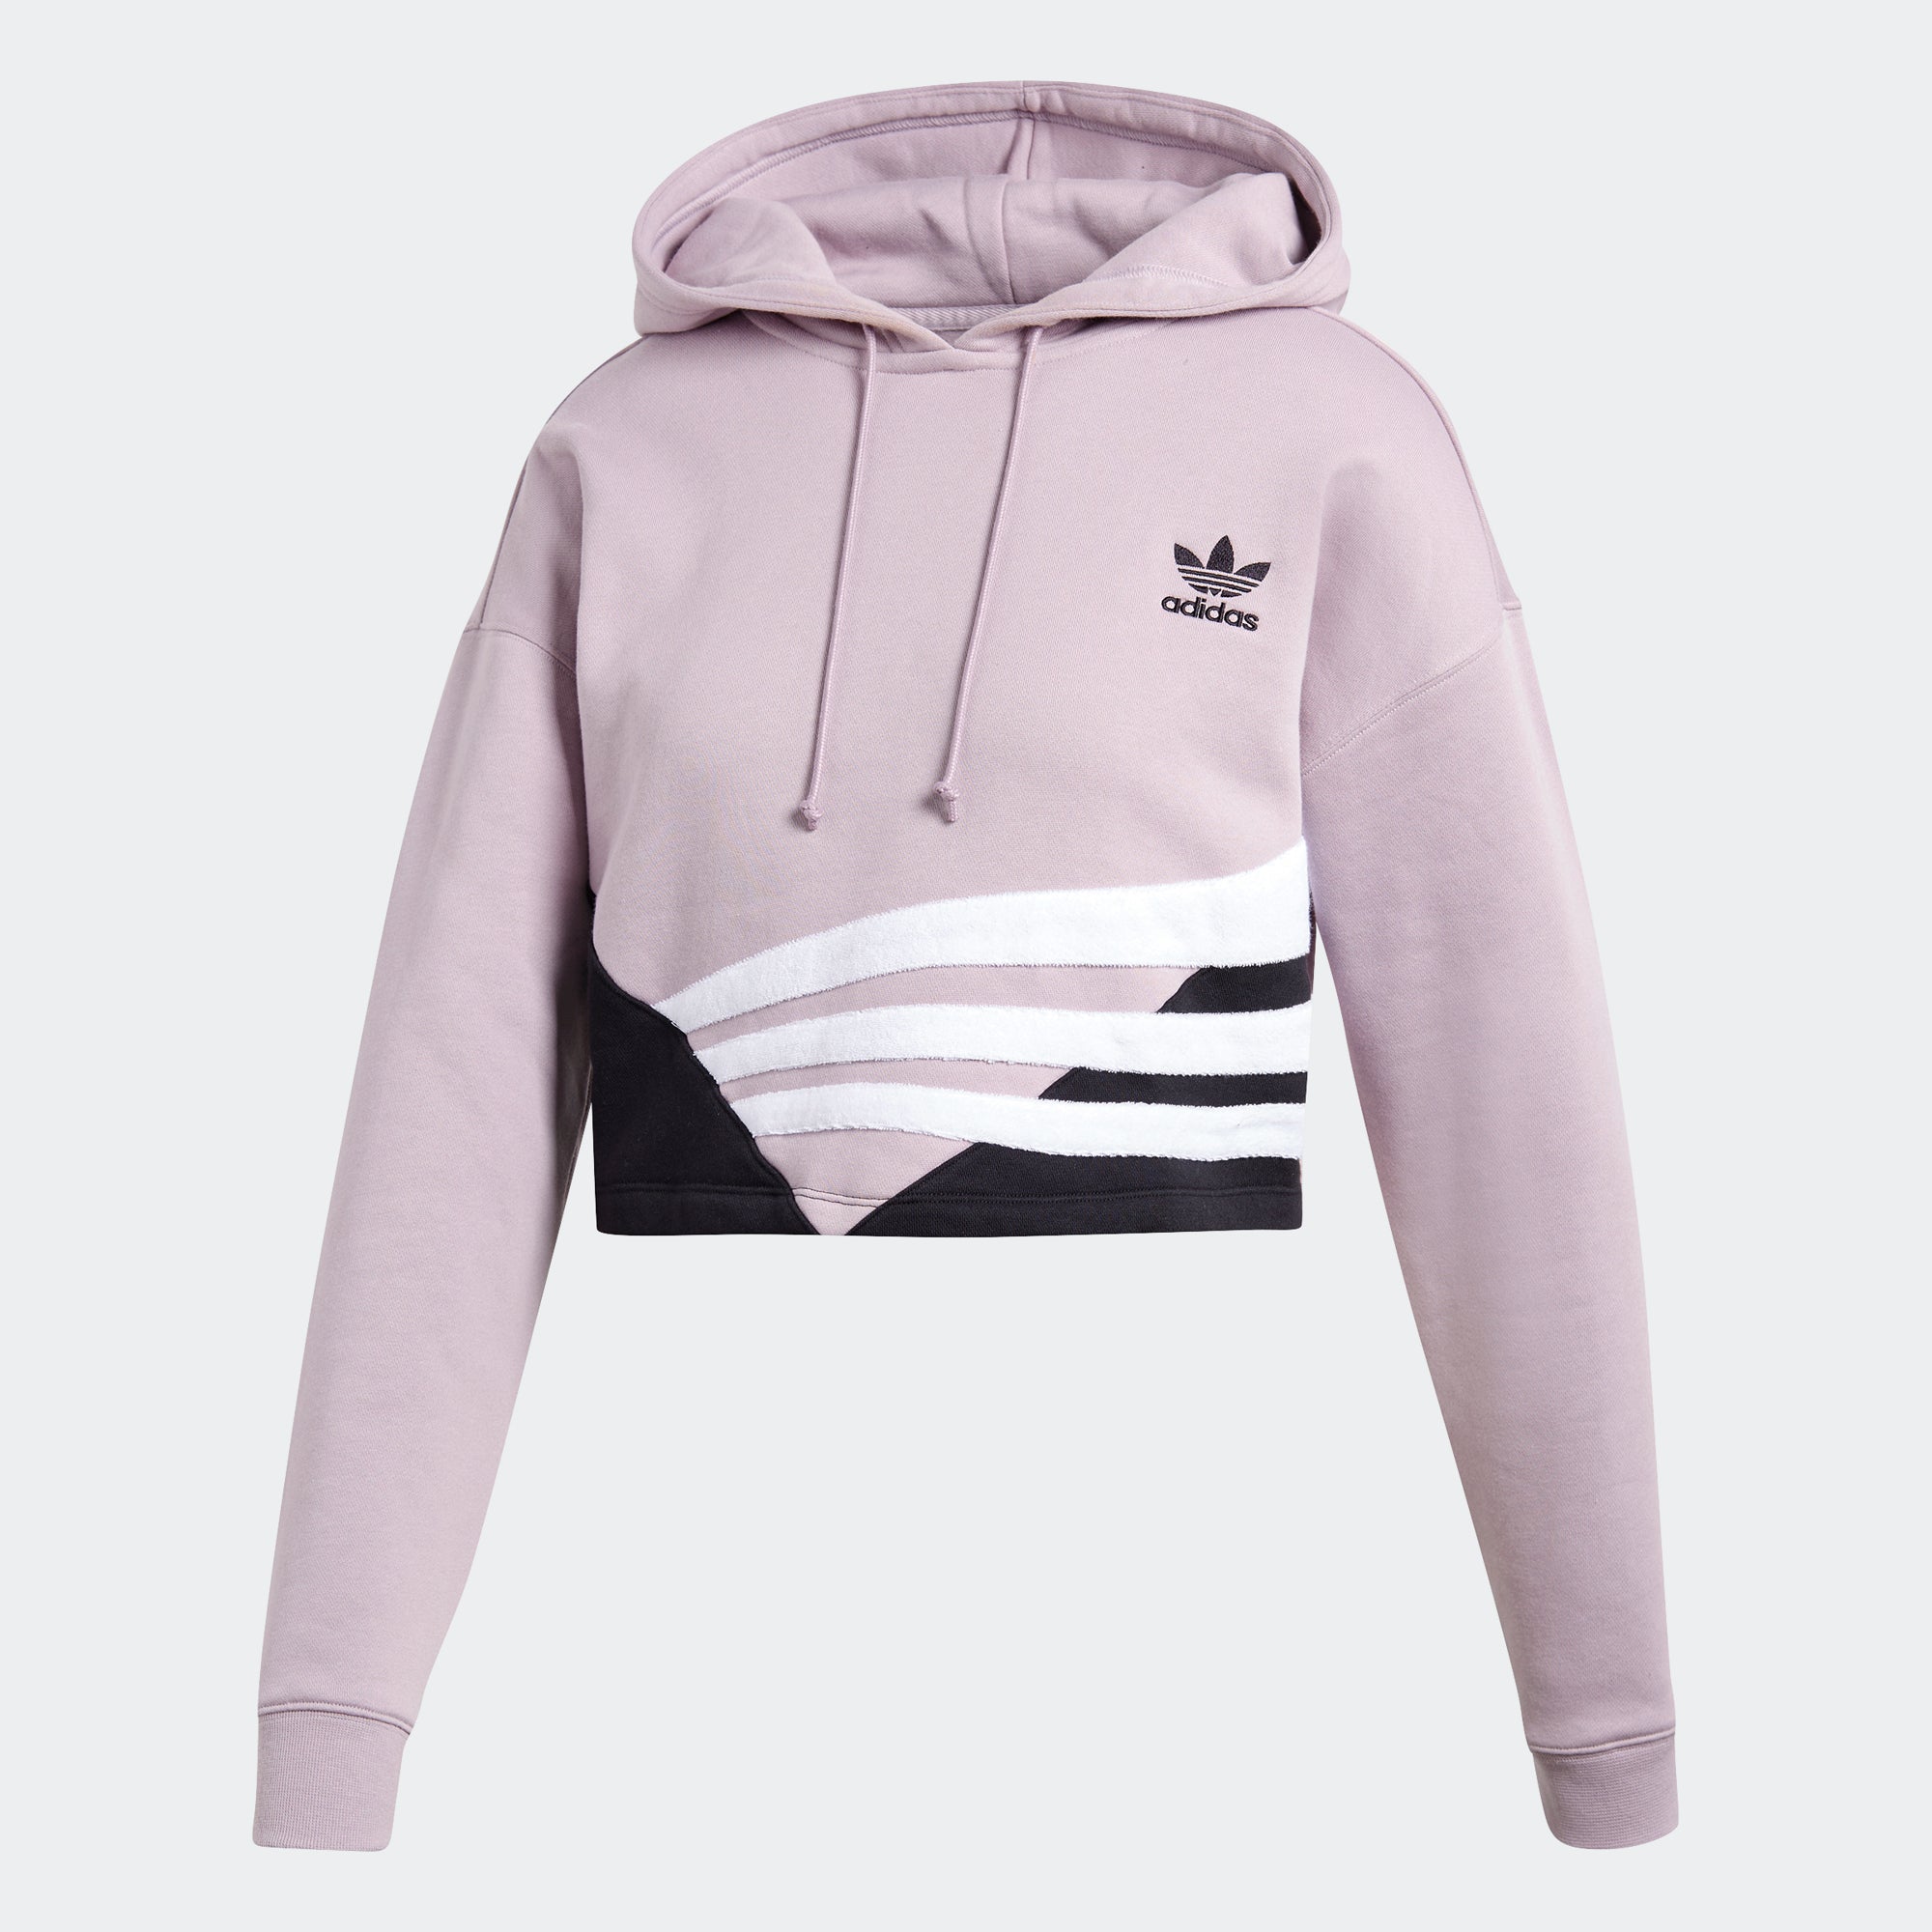 adidas cropped hoodie black and white